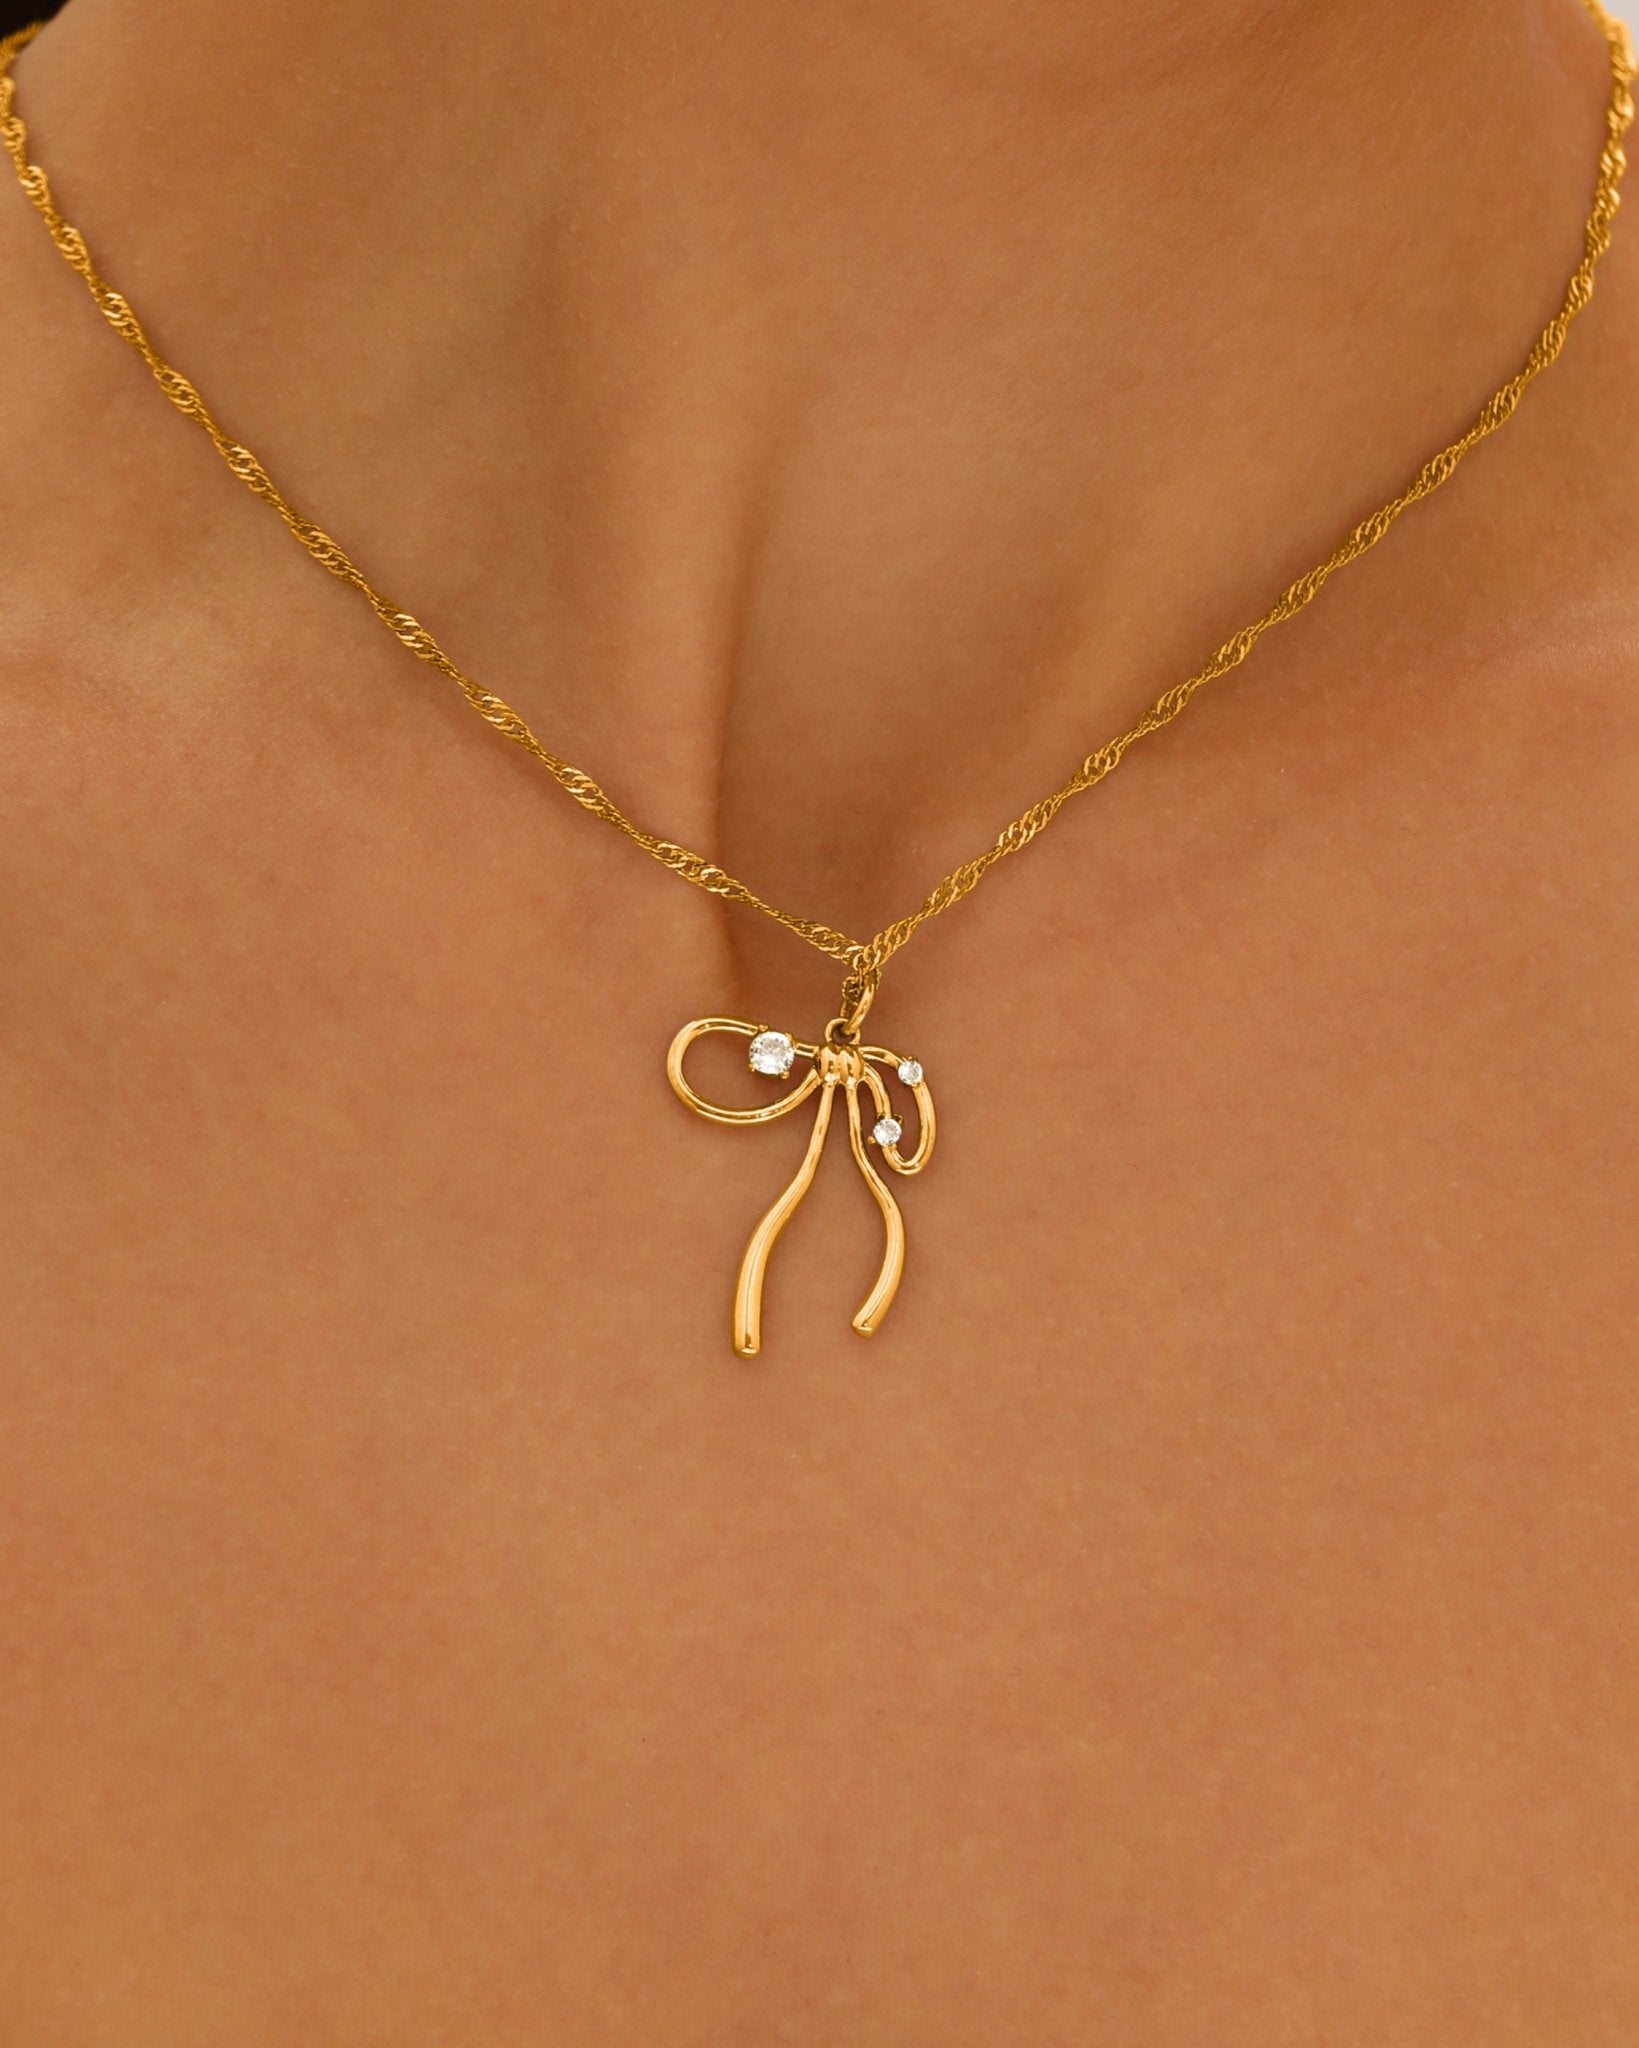 The Miffy Necklace